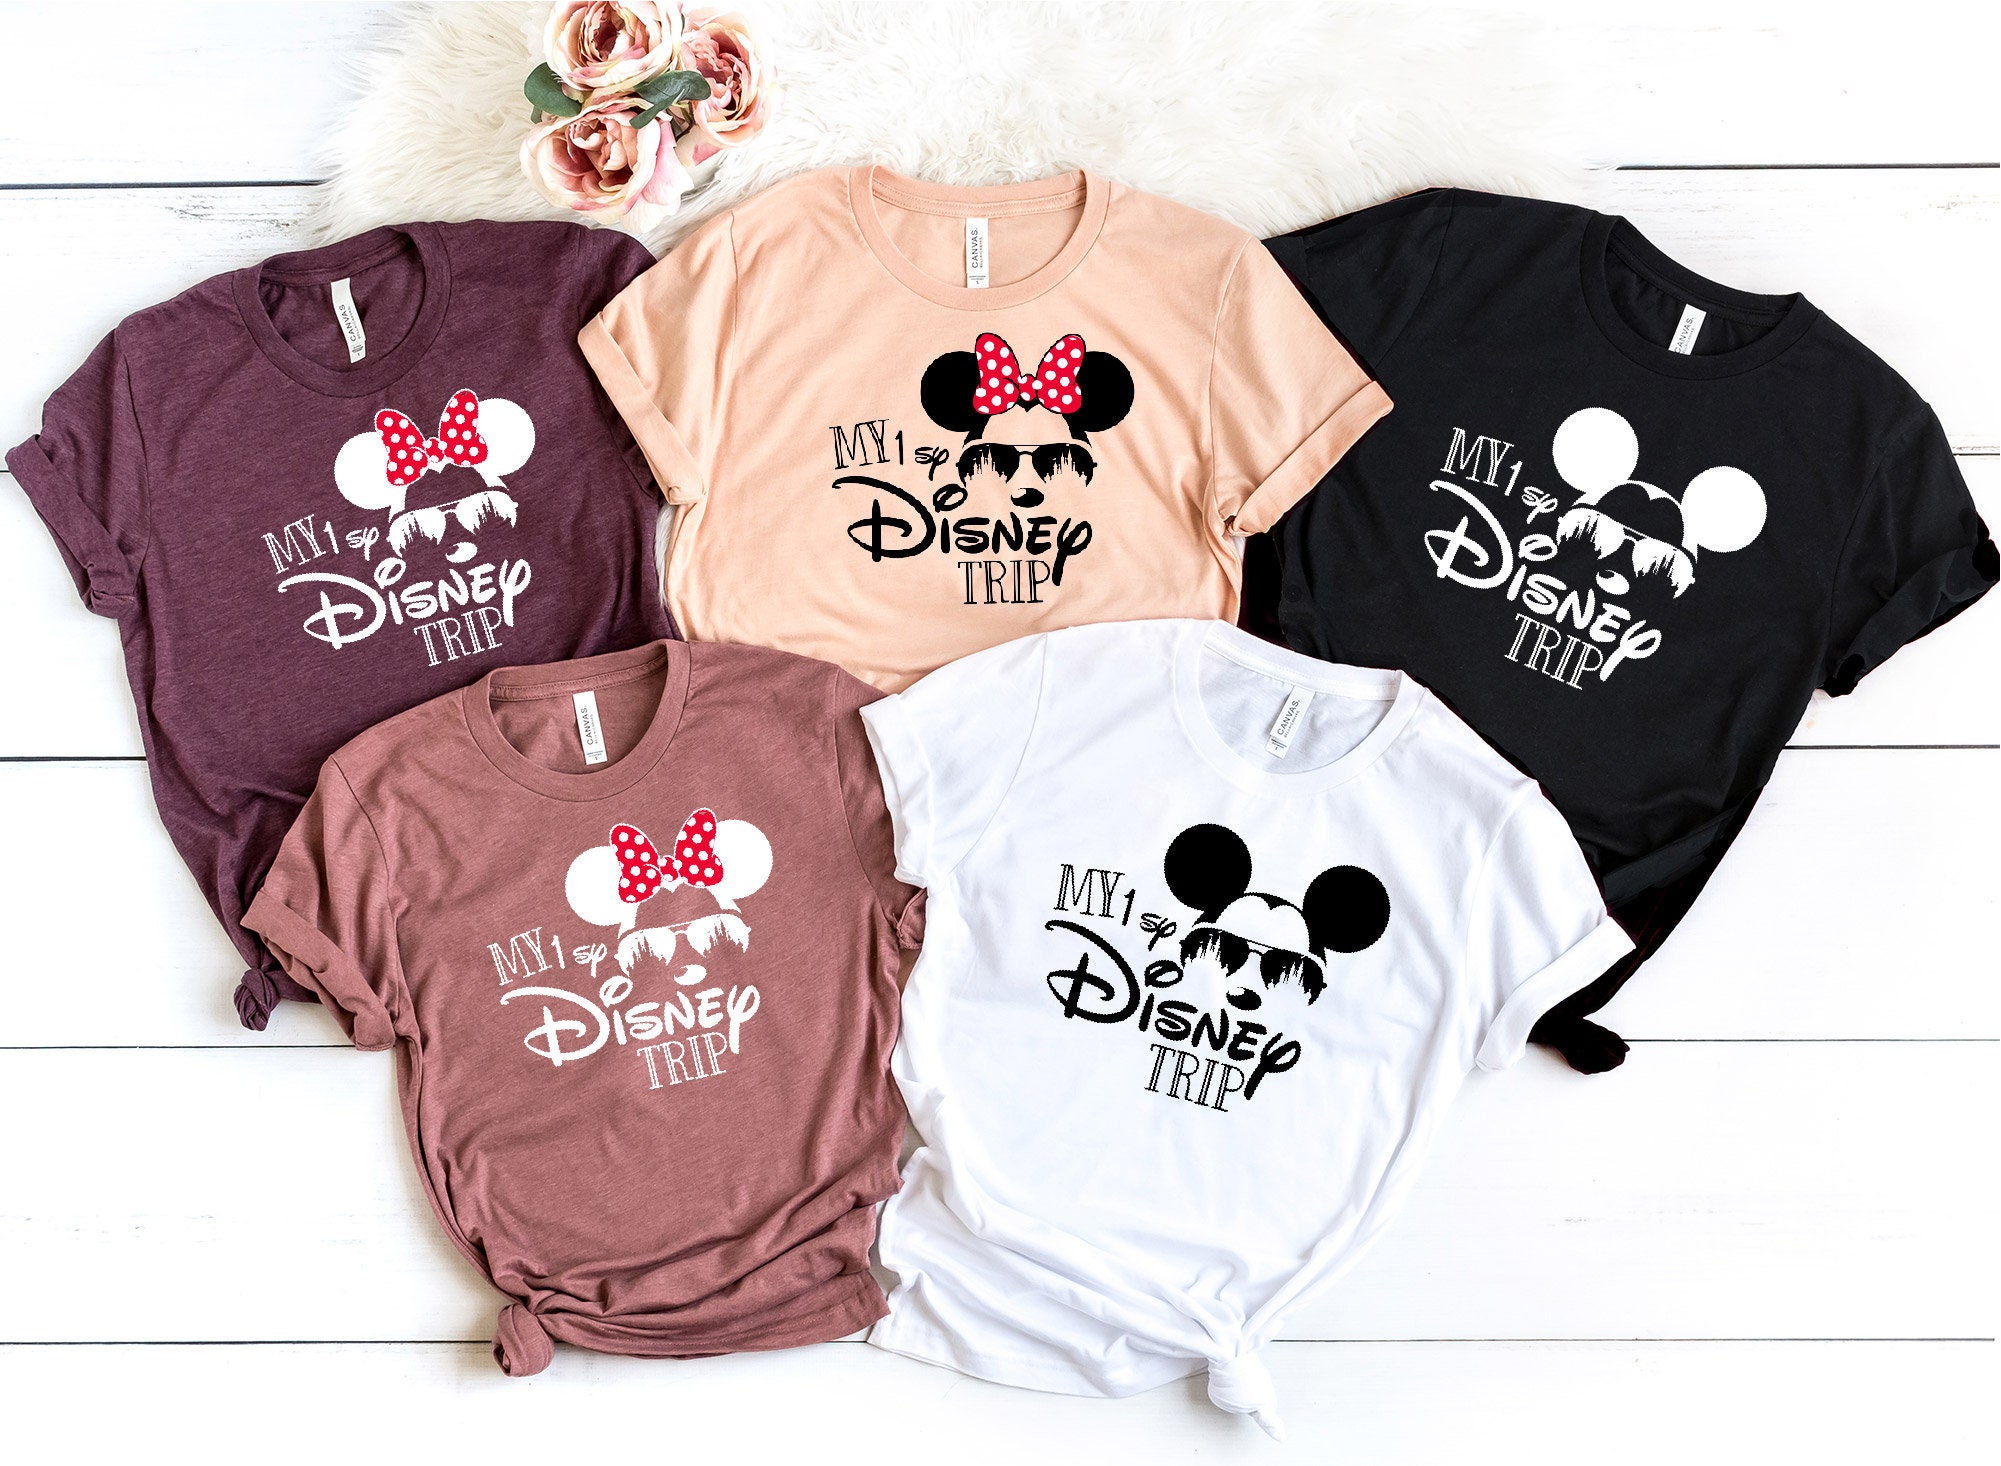 Discover 2023 My First Disney Trip Shirt, Disney Shirt, Disney Family Trip Shirt, Disney Squad Shirt, Disney Vacation Gifts, Disney Matching Tees